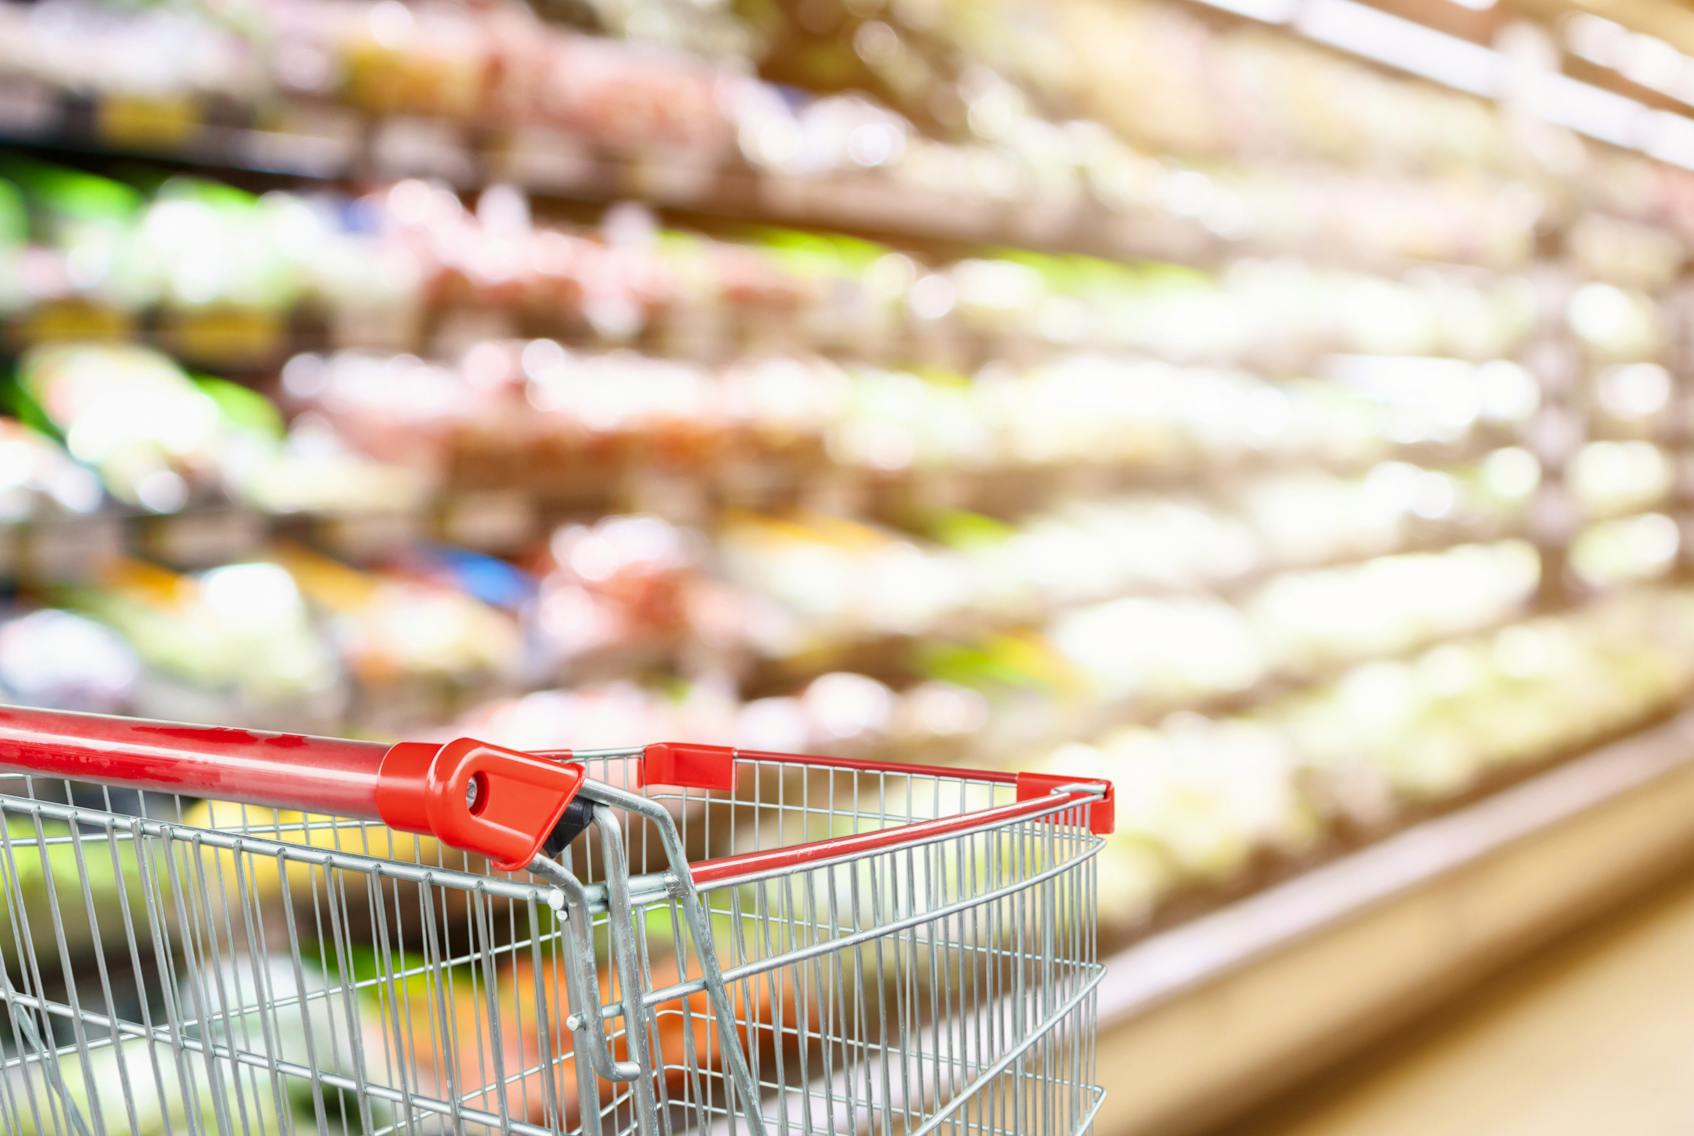 It’s possible the outcome of the federal election could be determined in the grocery aisle, writes food expert Sylvain Charlebois.